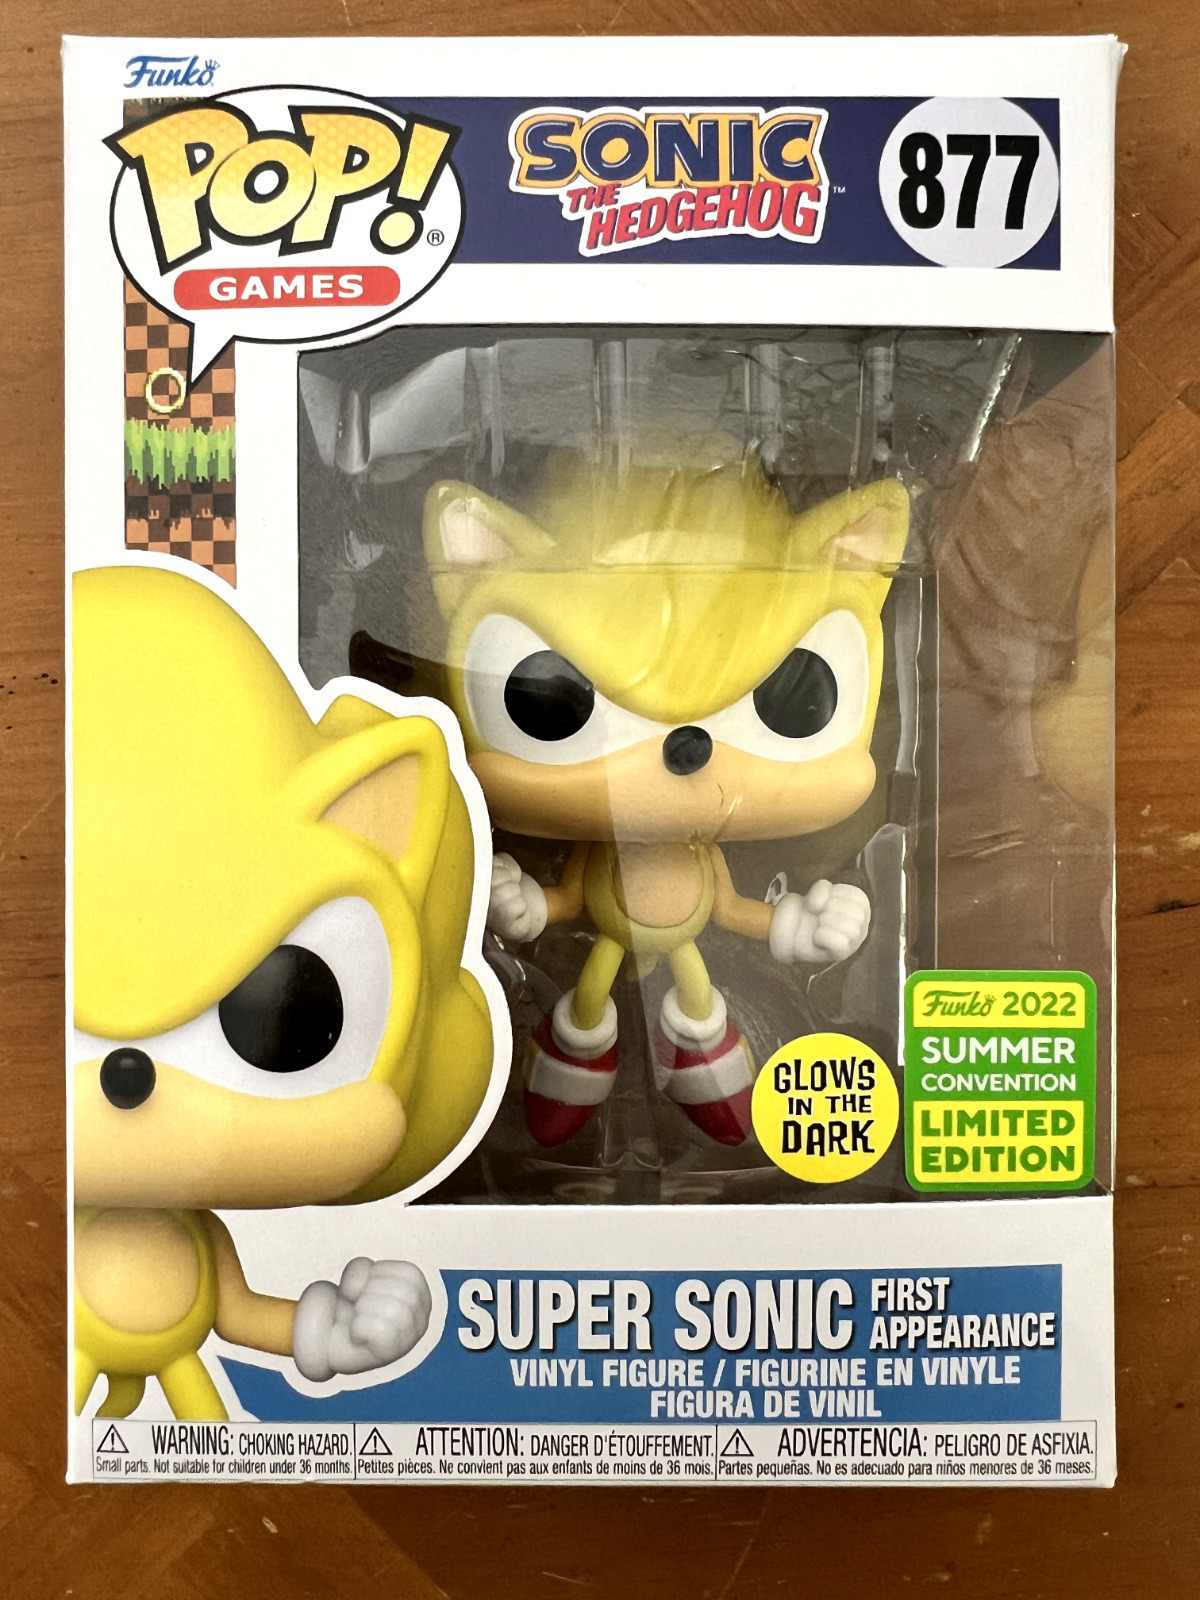 Funko Pop Vinyl: Sonic the Hedgehog - Super Sonic First Appearance - New